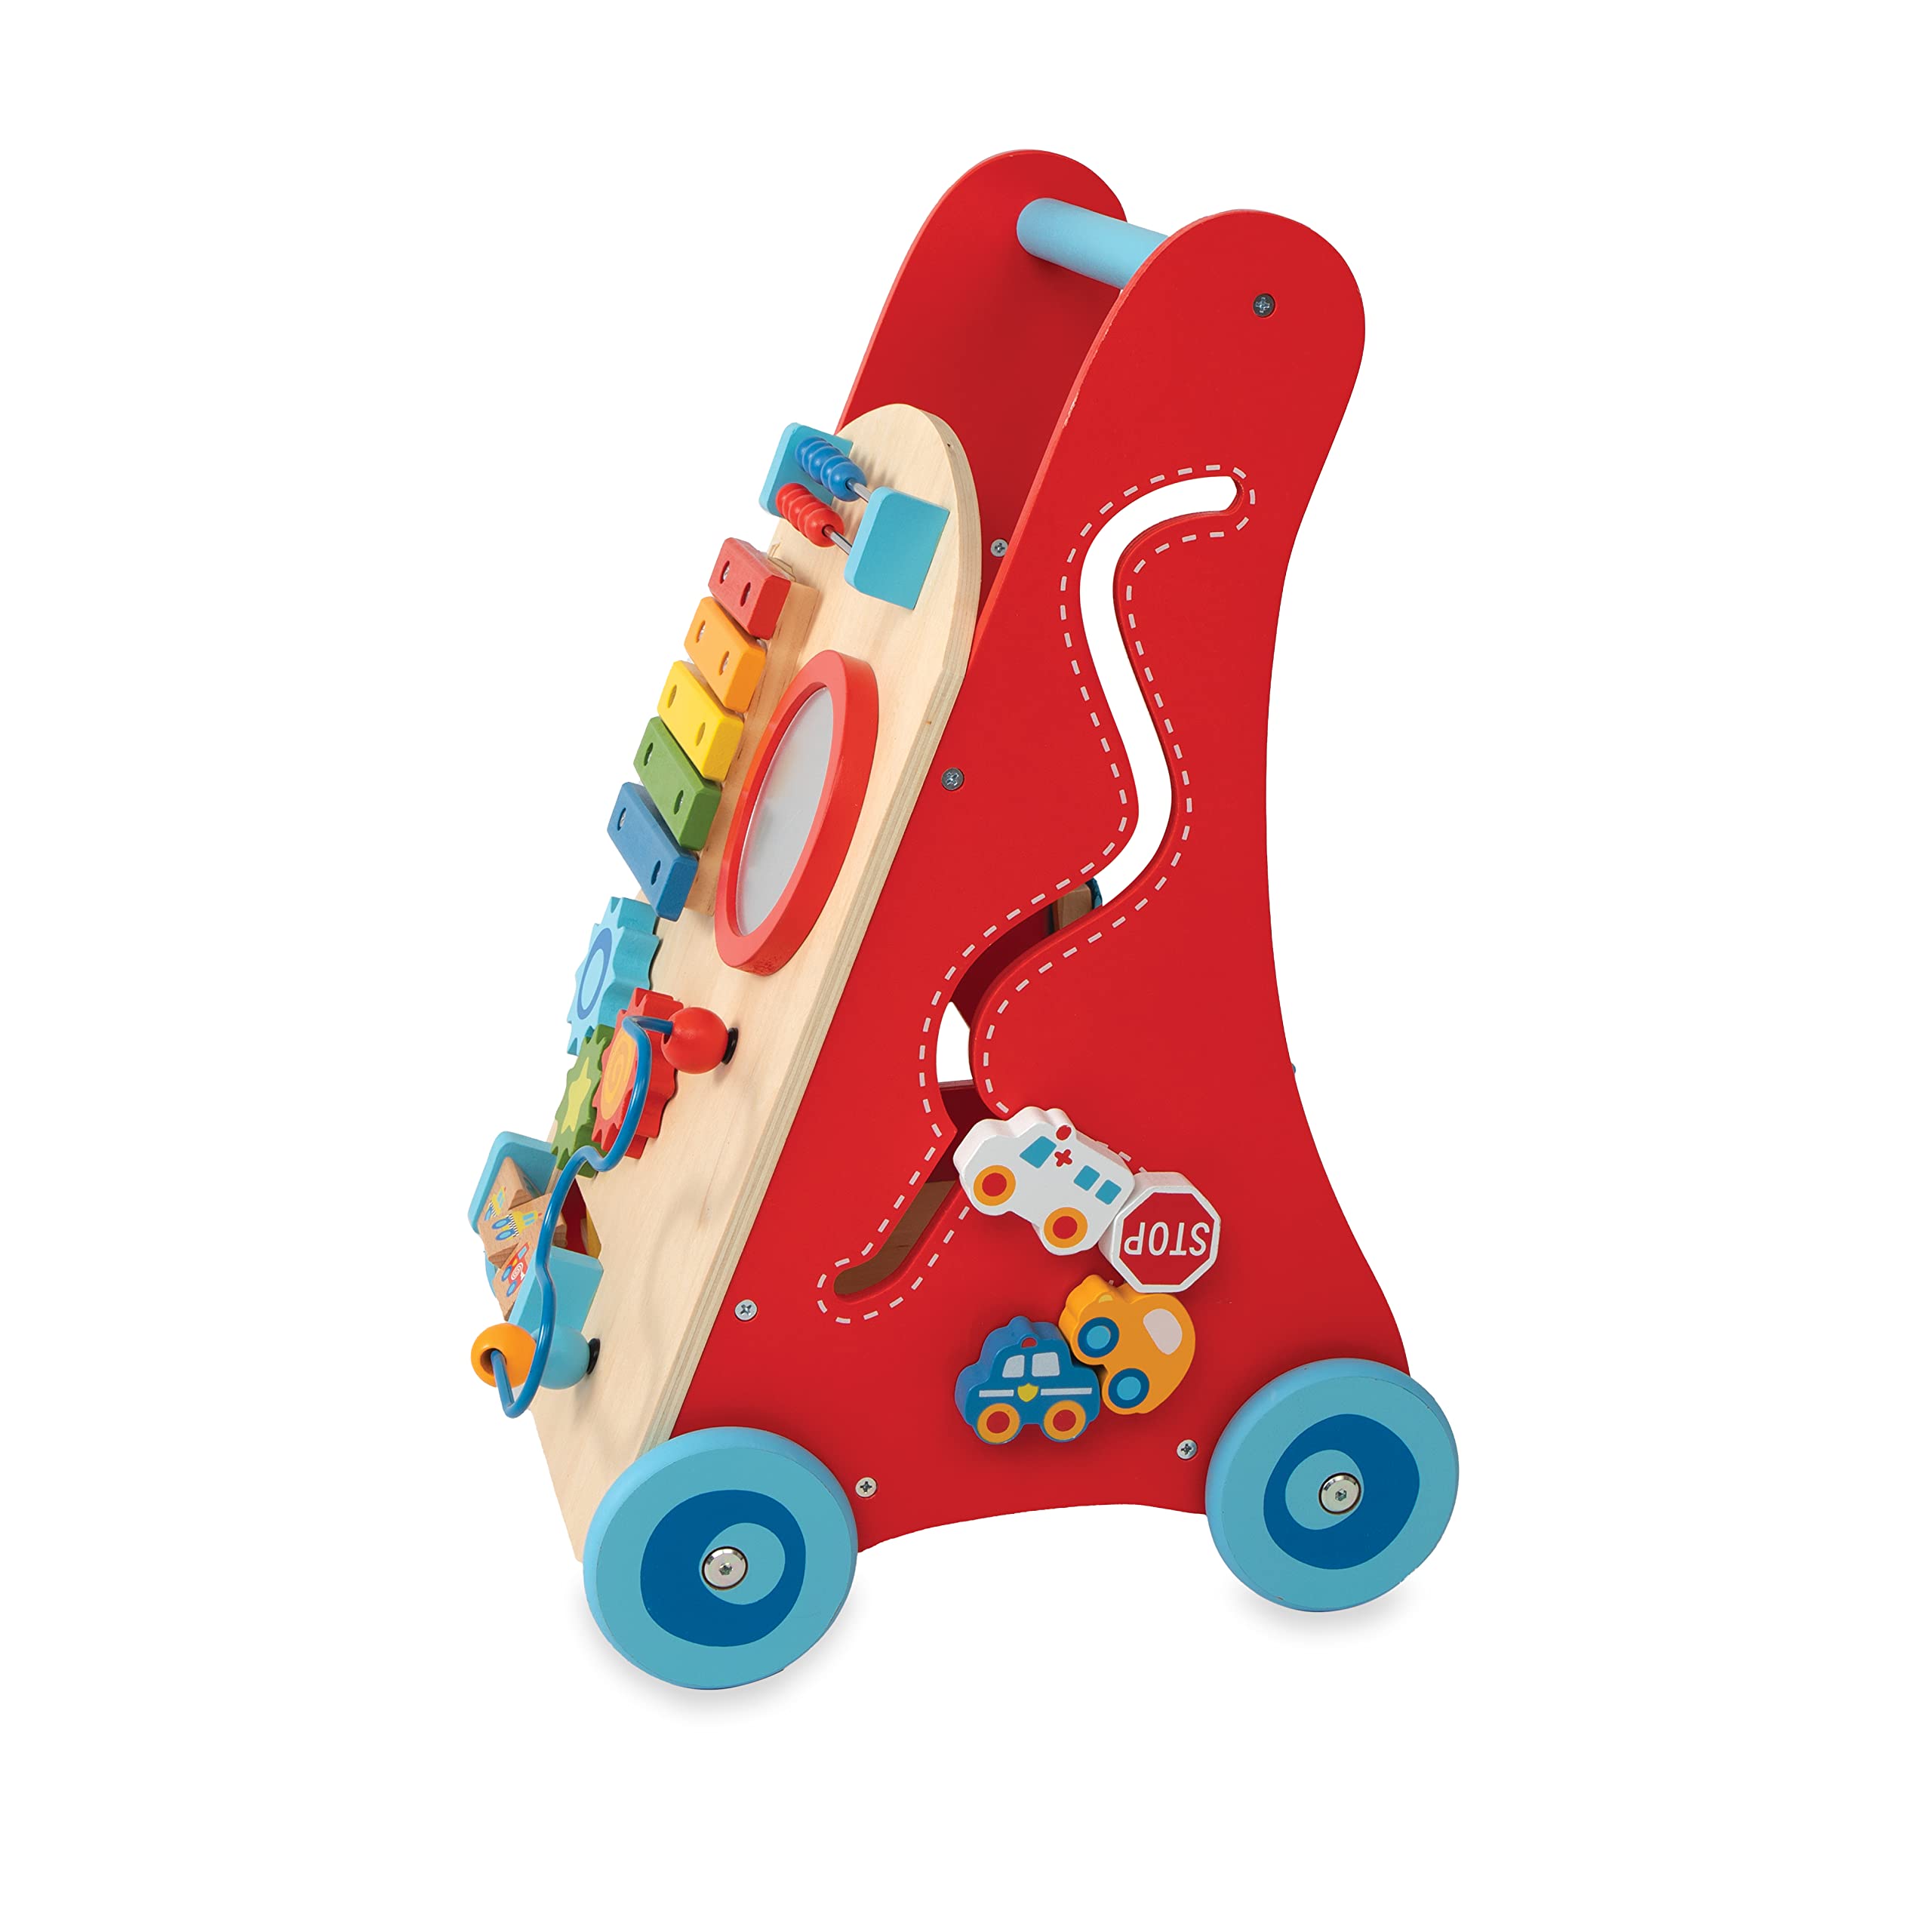 Nuby Wooden Baby Walker with Interactive Features for Early Development, Promotes Walking, Motor Skills, and Creativity